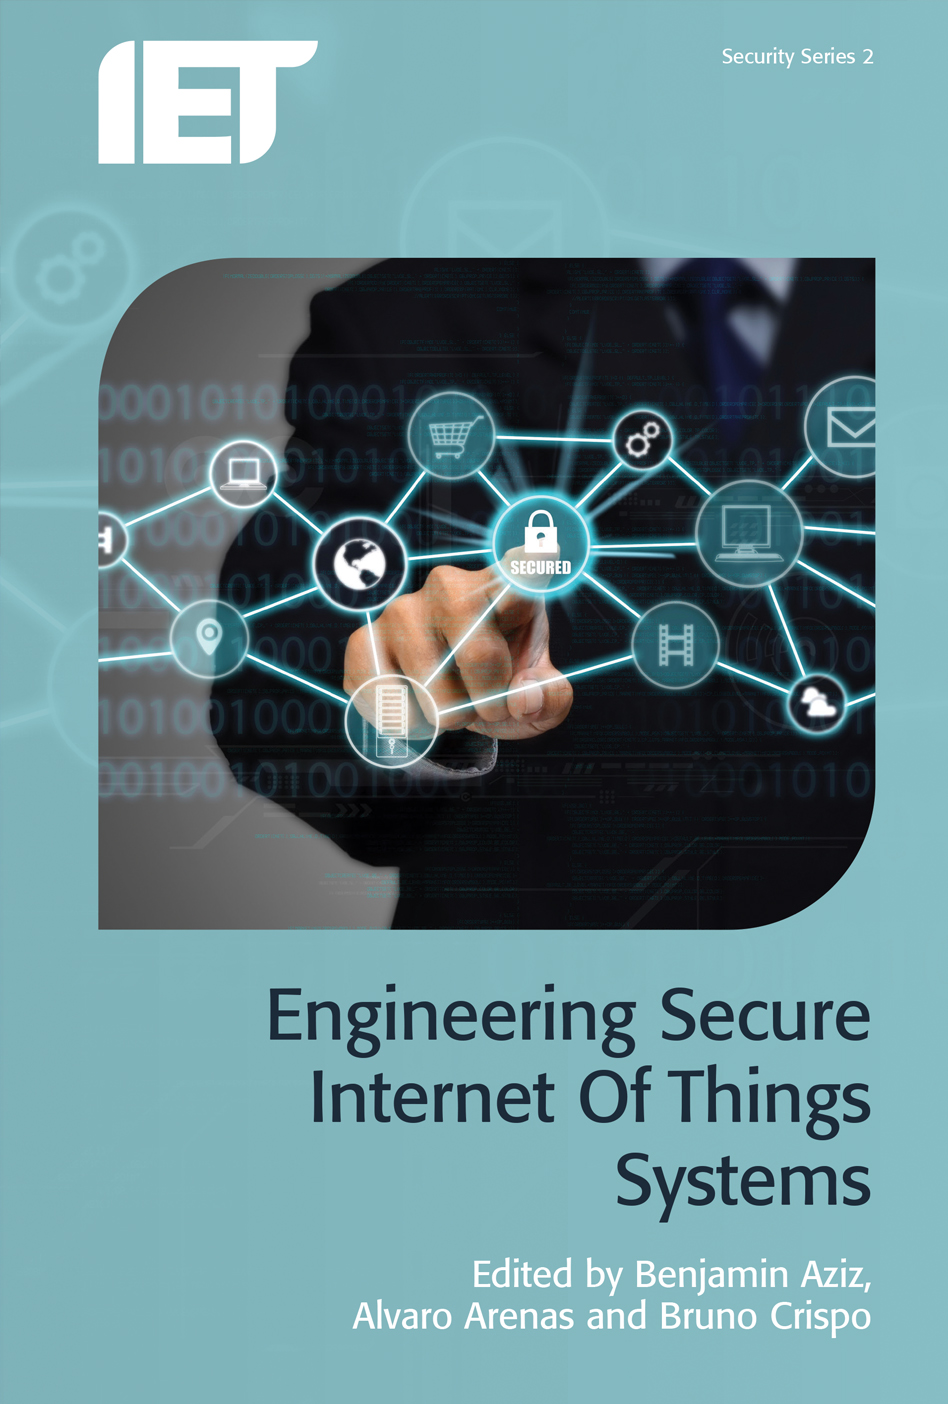 Engineering Secure Internet of Things Systems